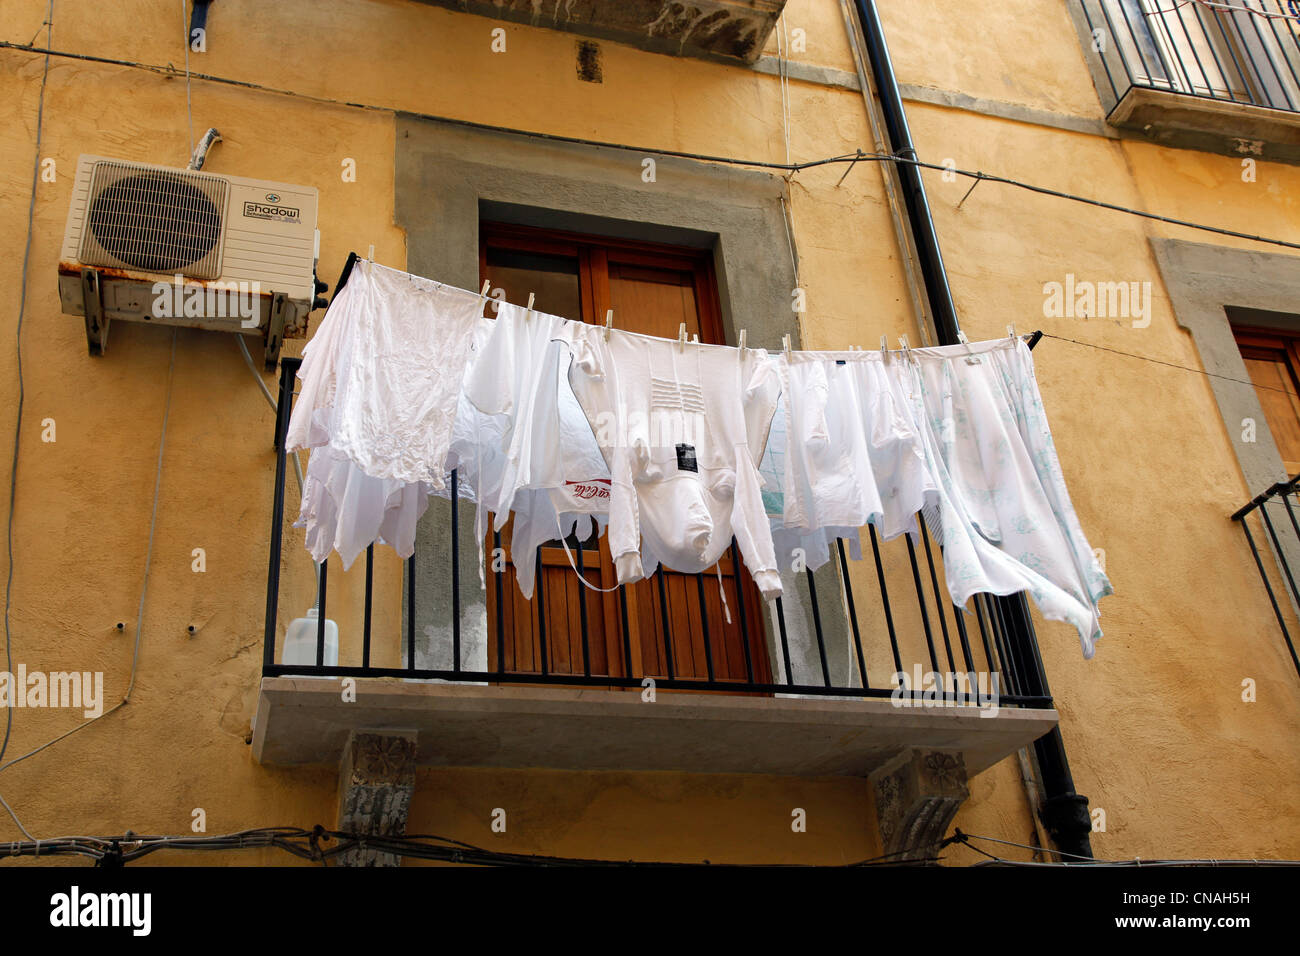 Washing hanging out in the street in Trapani, Sicily, Italy Stock Photo